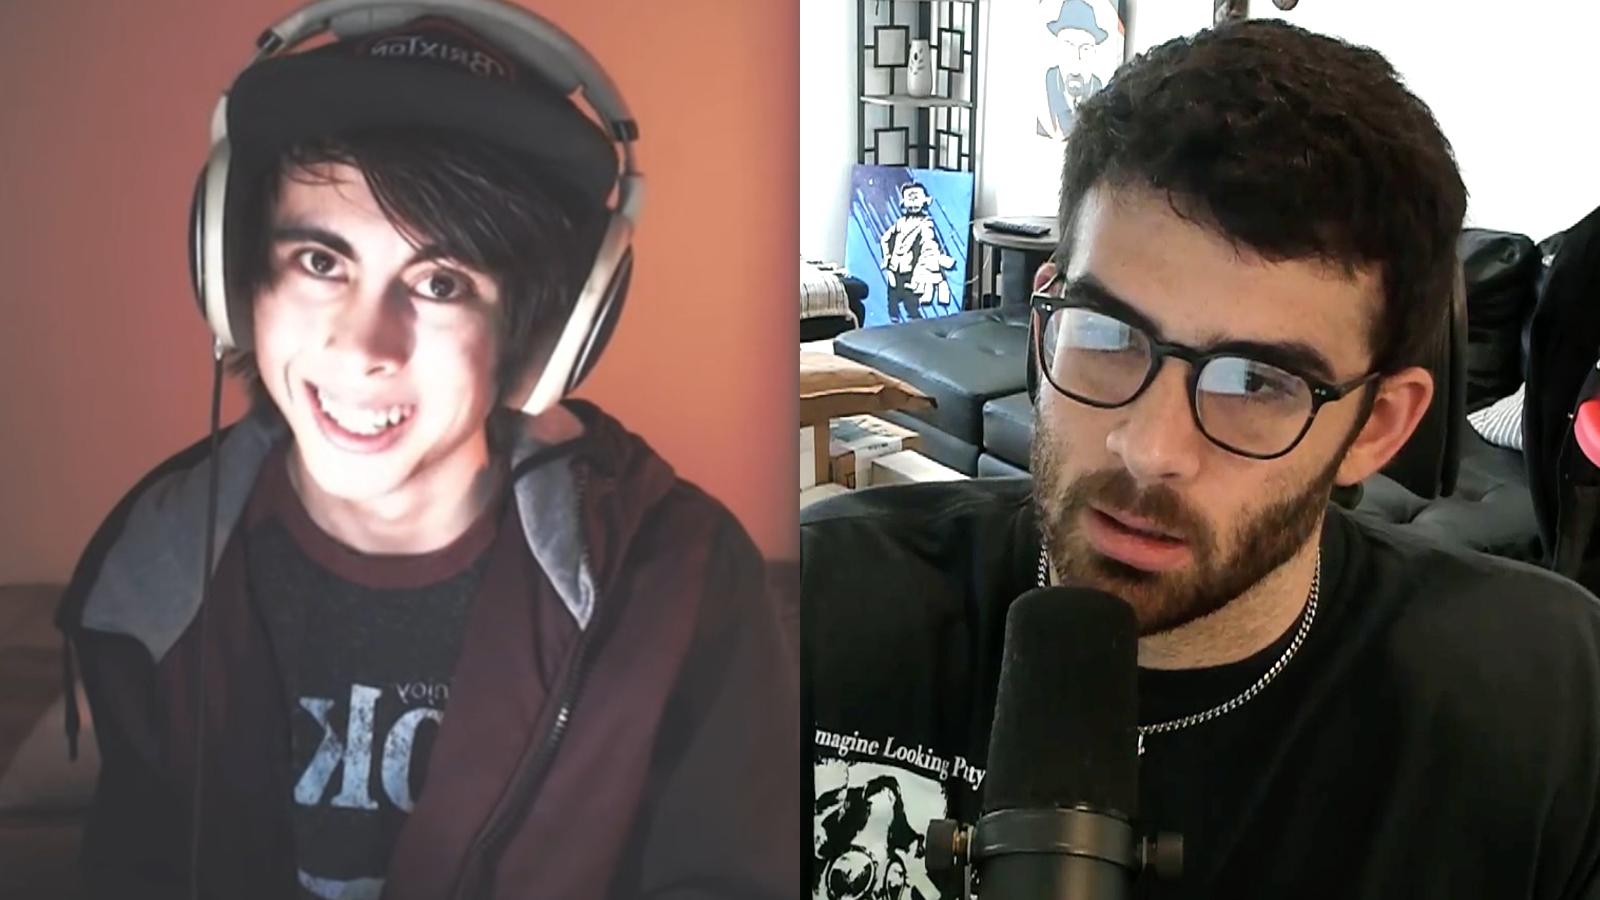 YouTuber Leafy and Streamer Hasan